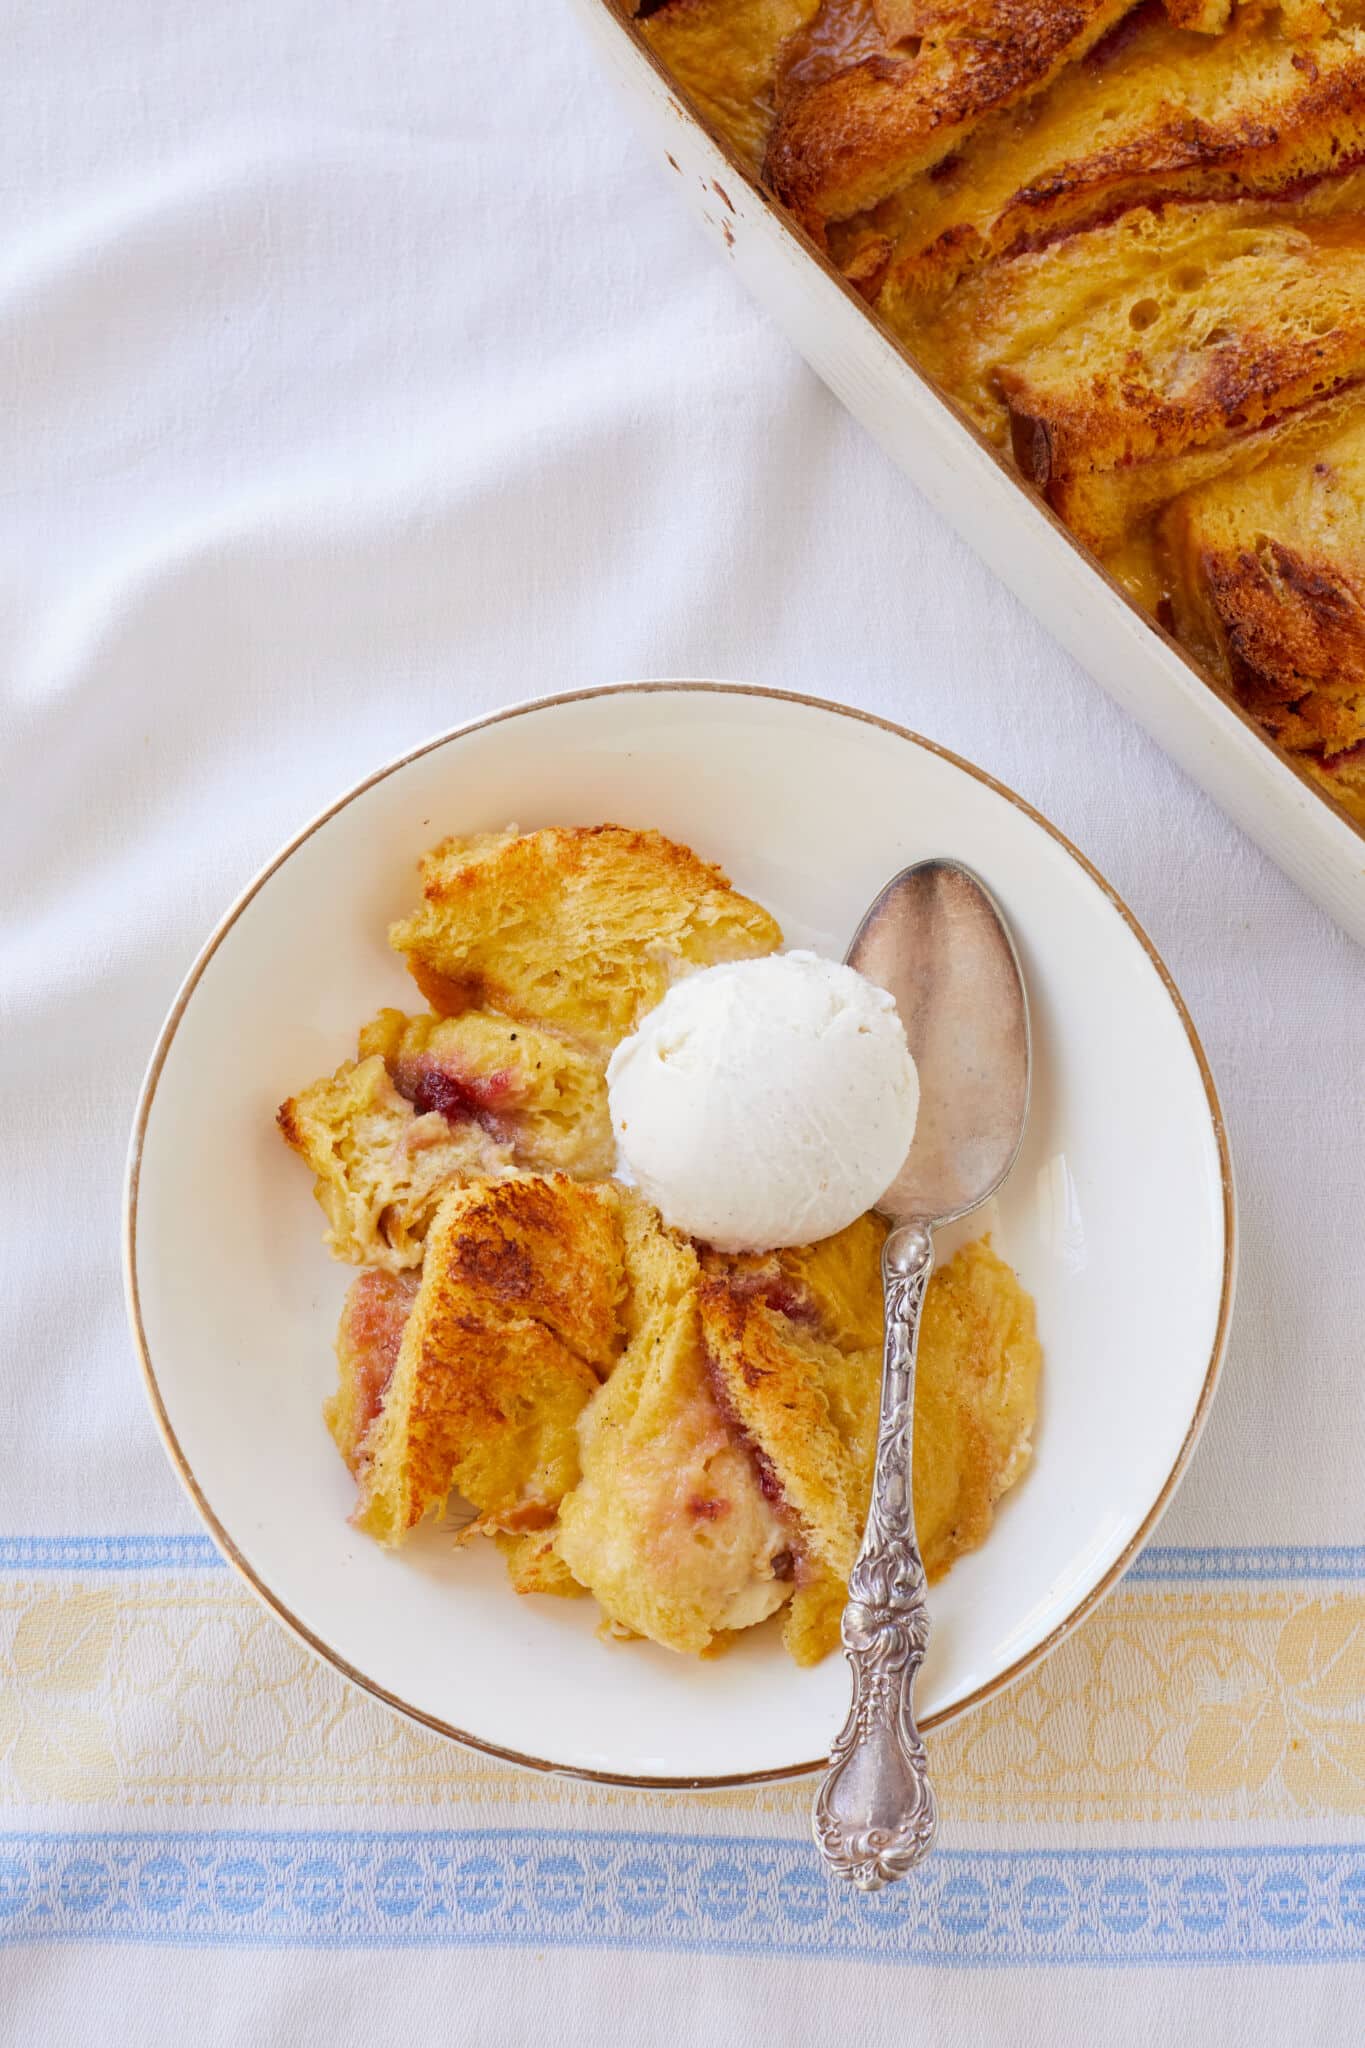 Butter and Jam Bread Pudding is served in a golden-edge white ceramic dessert bowl with a scoop of ice cream on top and a silver spoon. The bread is baked golden-brown and slightly crispy on top, glistening with melted butter and vibrant red strawberry jam. The rich velvety custard is visible through the brioche's edges. The rest is in the white baking dish in the top right corner of the image. 